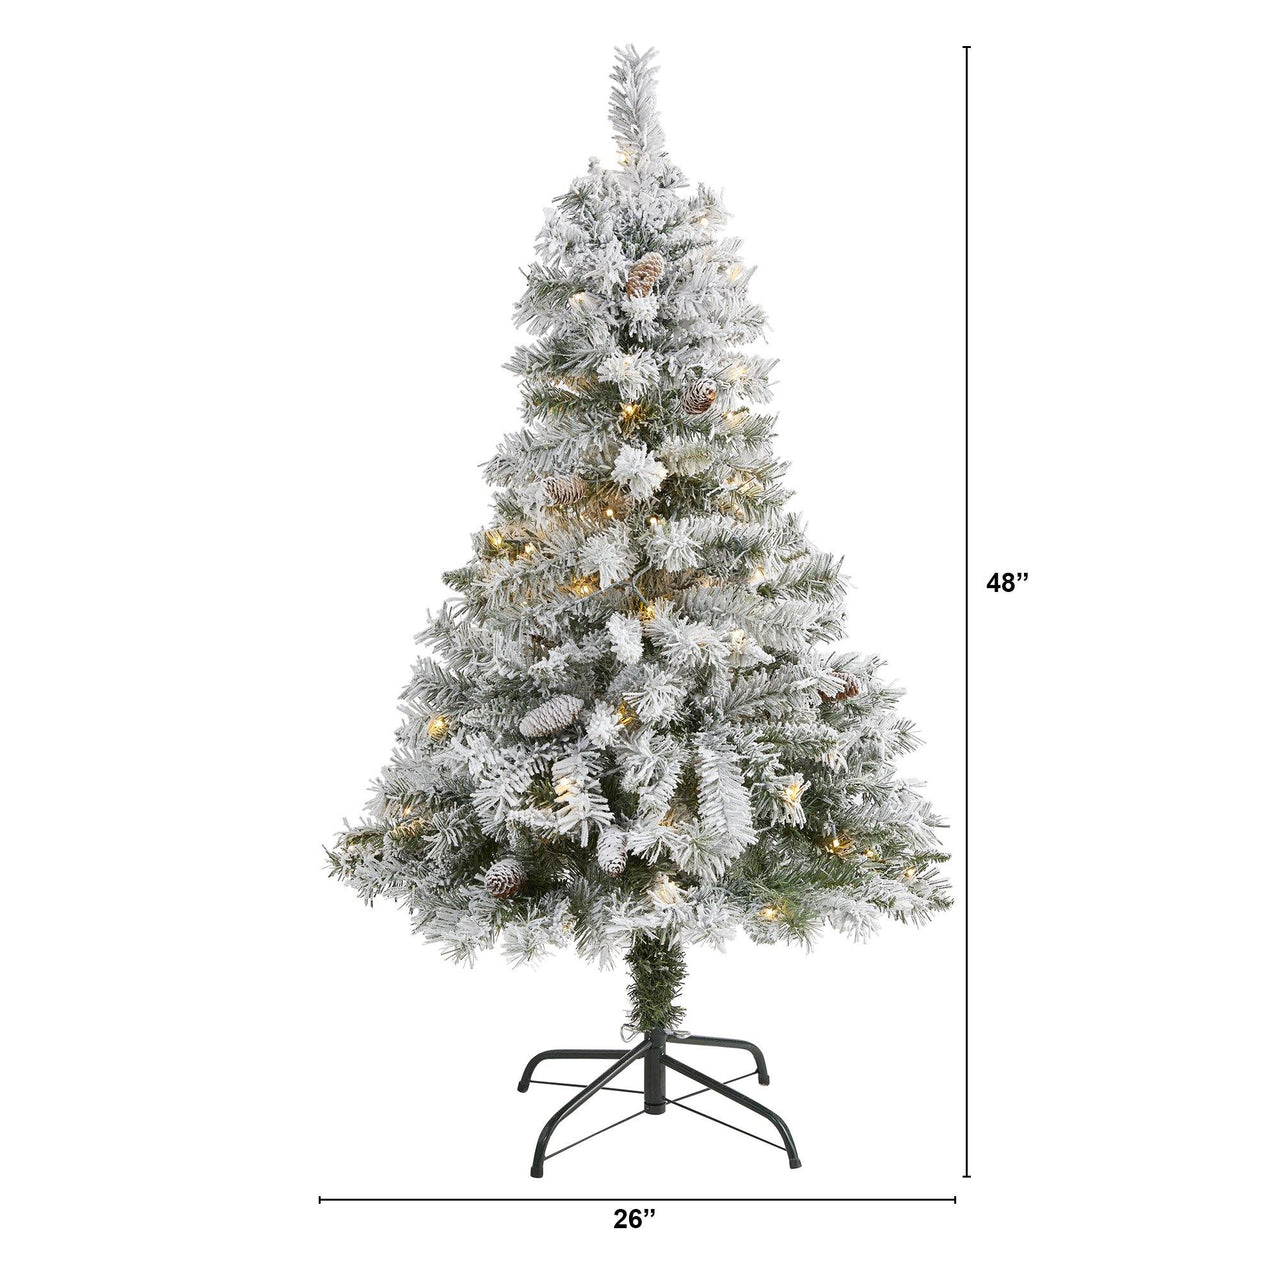 4' Flocked White River Mountain Pine Artificial Christmas Tree with Pinecones and 100 Clear LED Lights - The Fox Decor